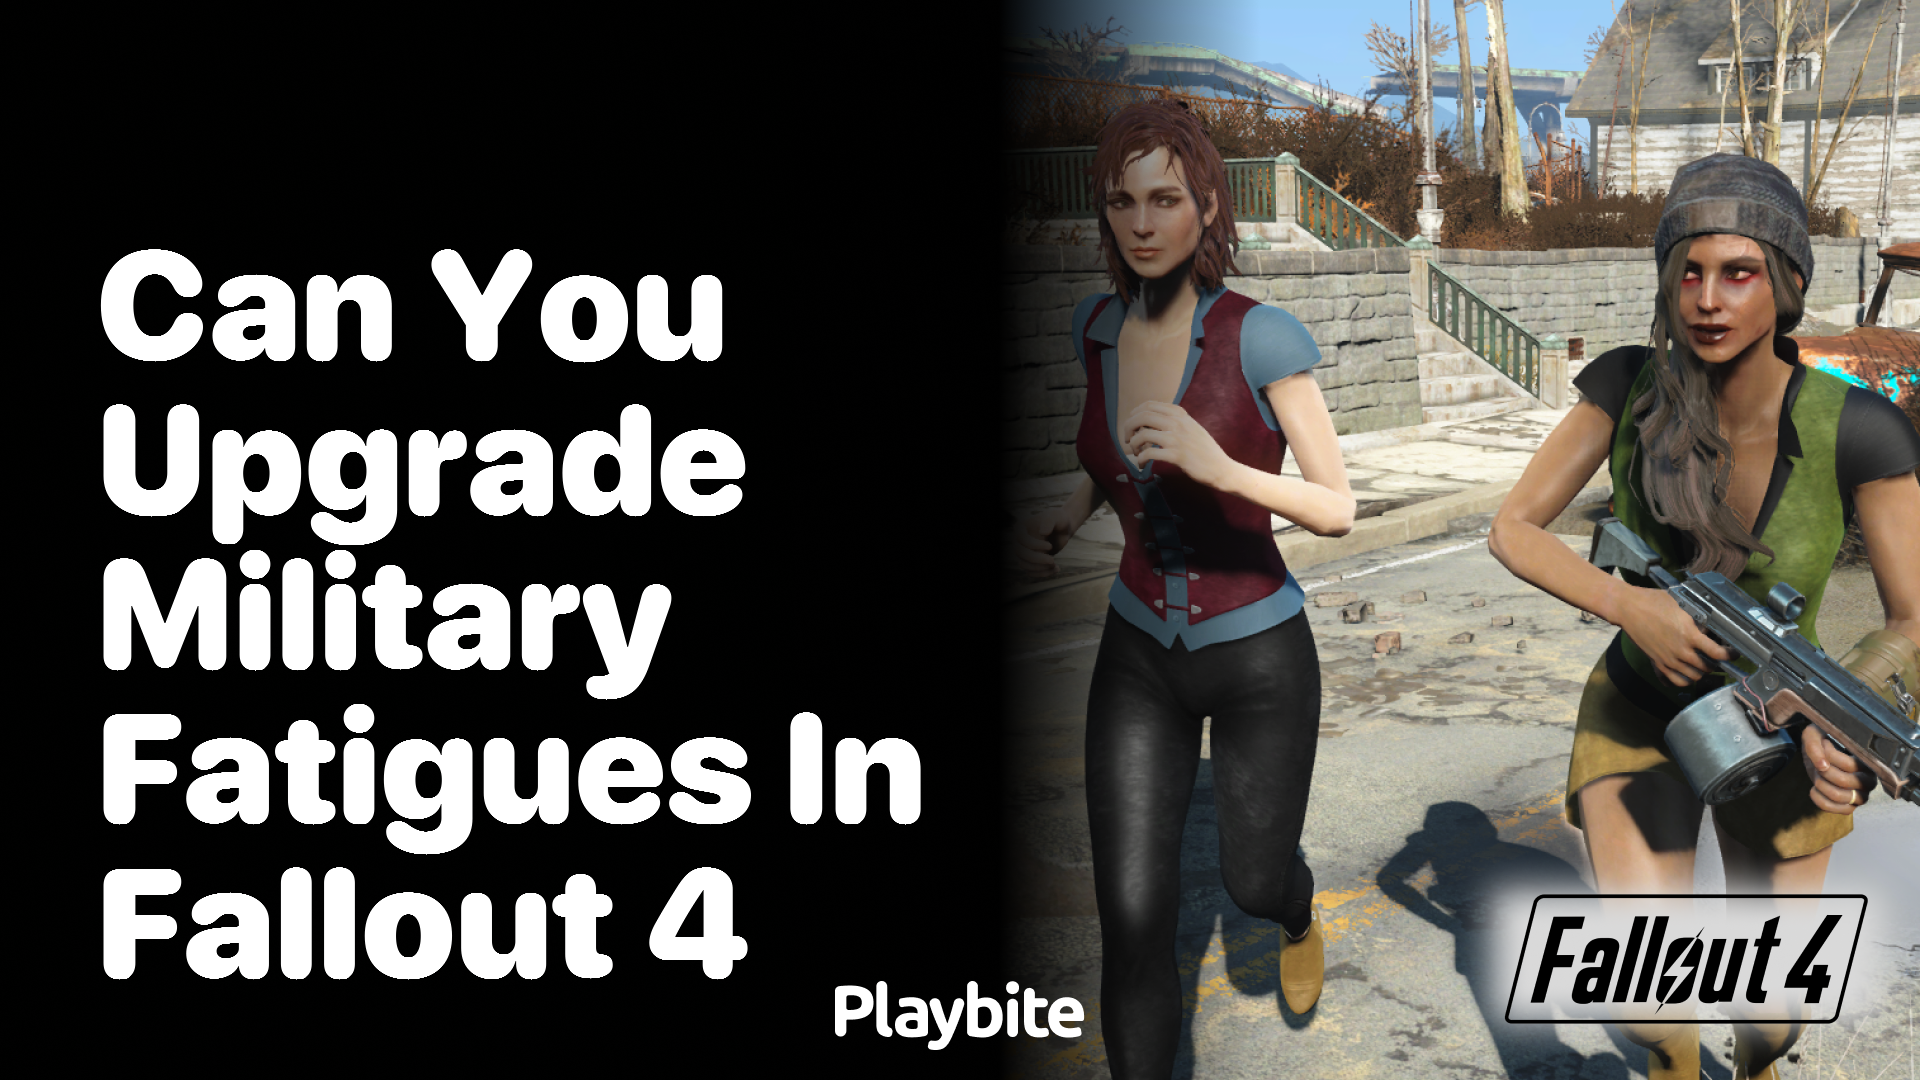 Can You Upgrade Military Fatigues in Fallout 4?